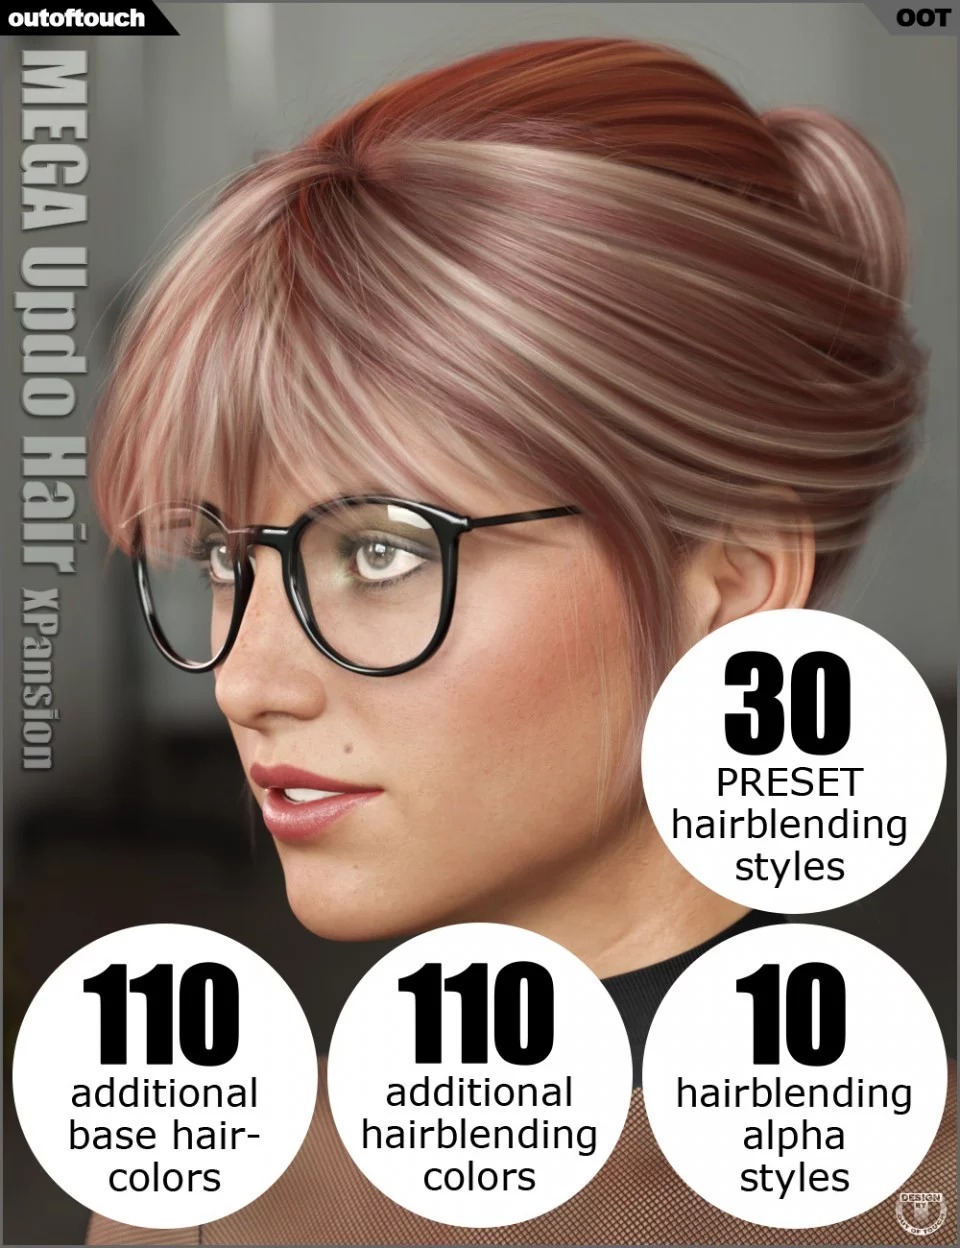 OOT Hairblending 2.0 Texture XPansion for MEGA Updo Hair_DAZ3DDL